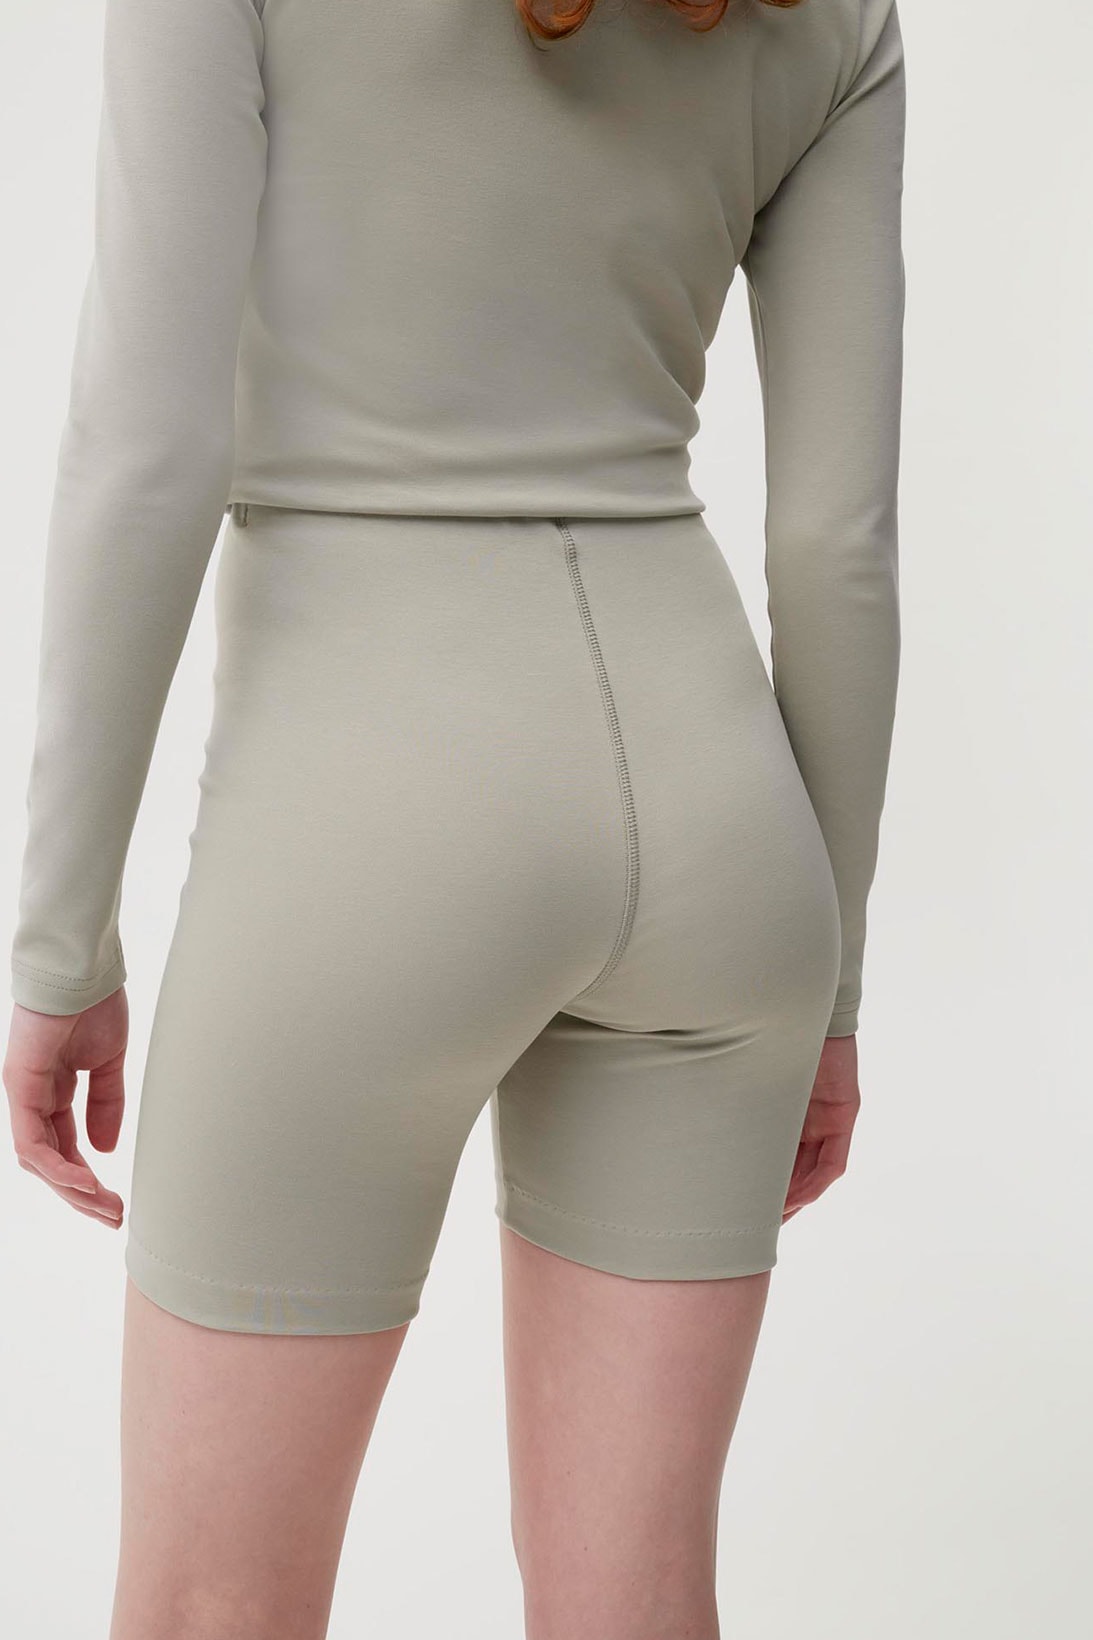 pangaia roica stretch athleisure sustainable collection turtleneck top bike shorts gray beige